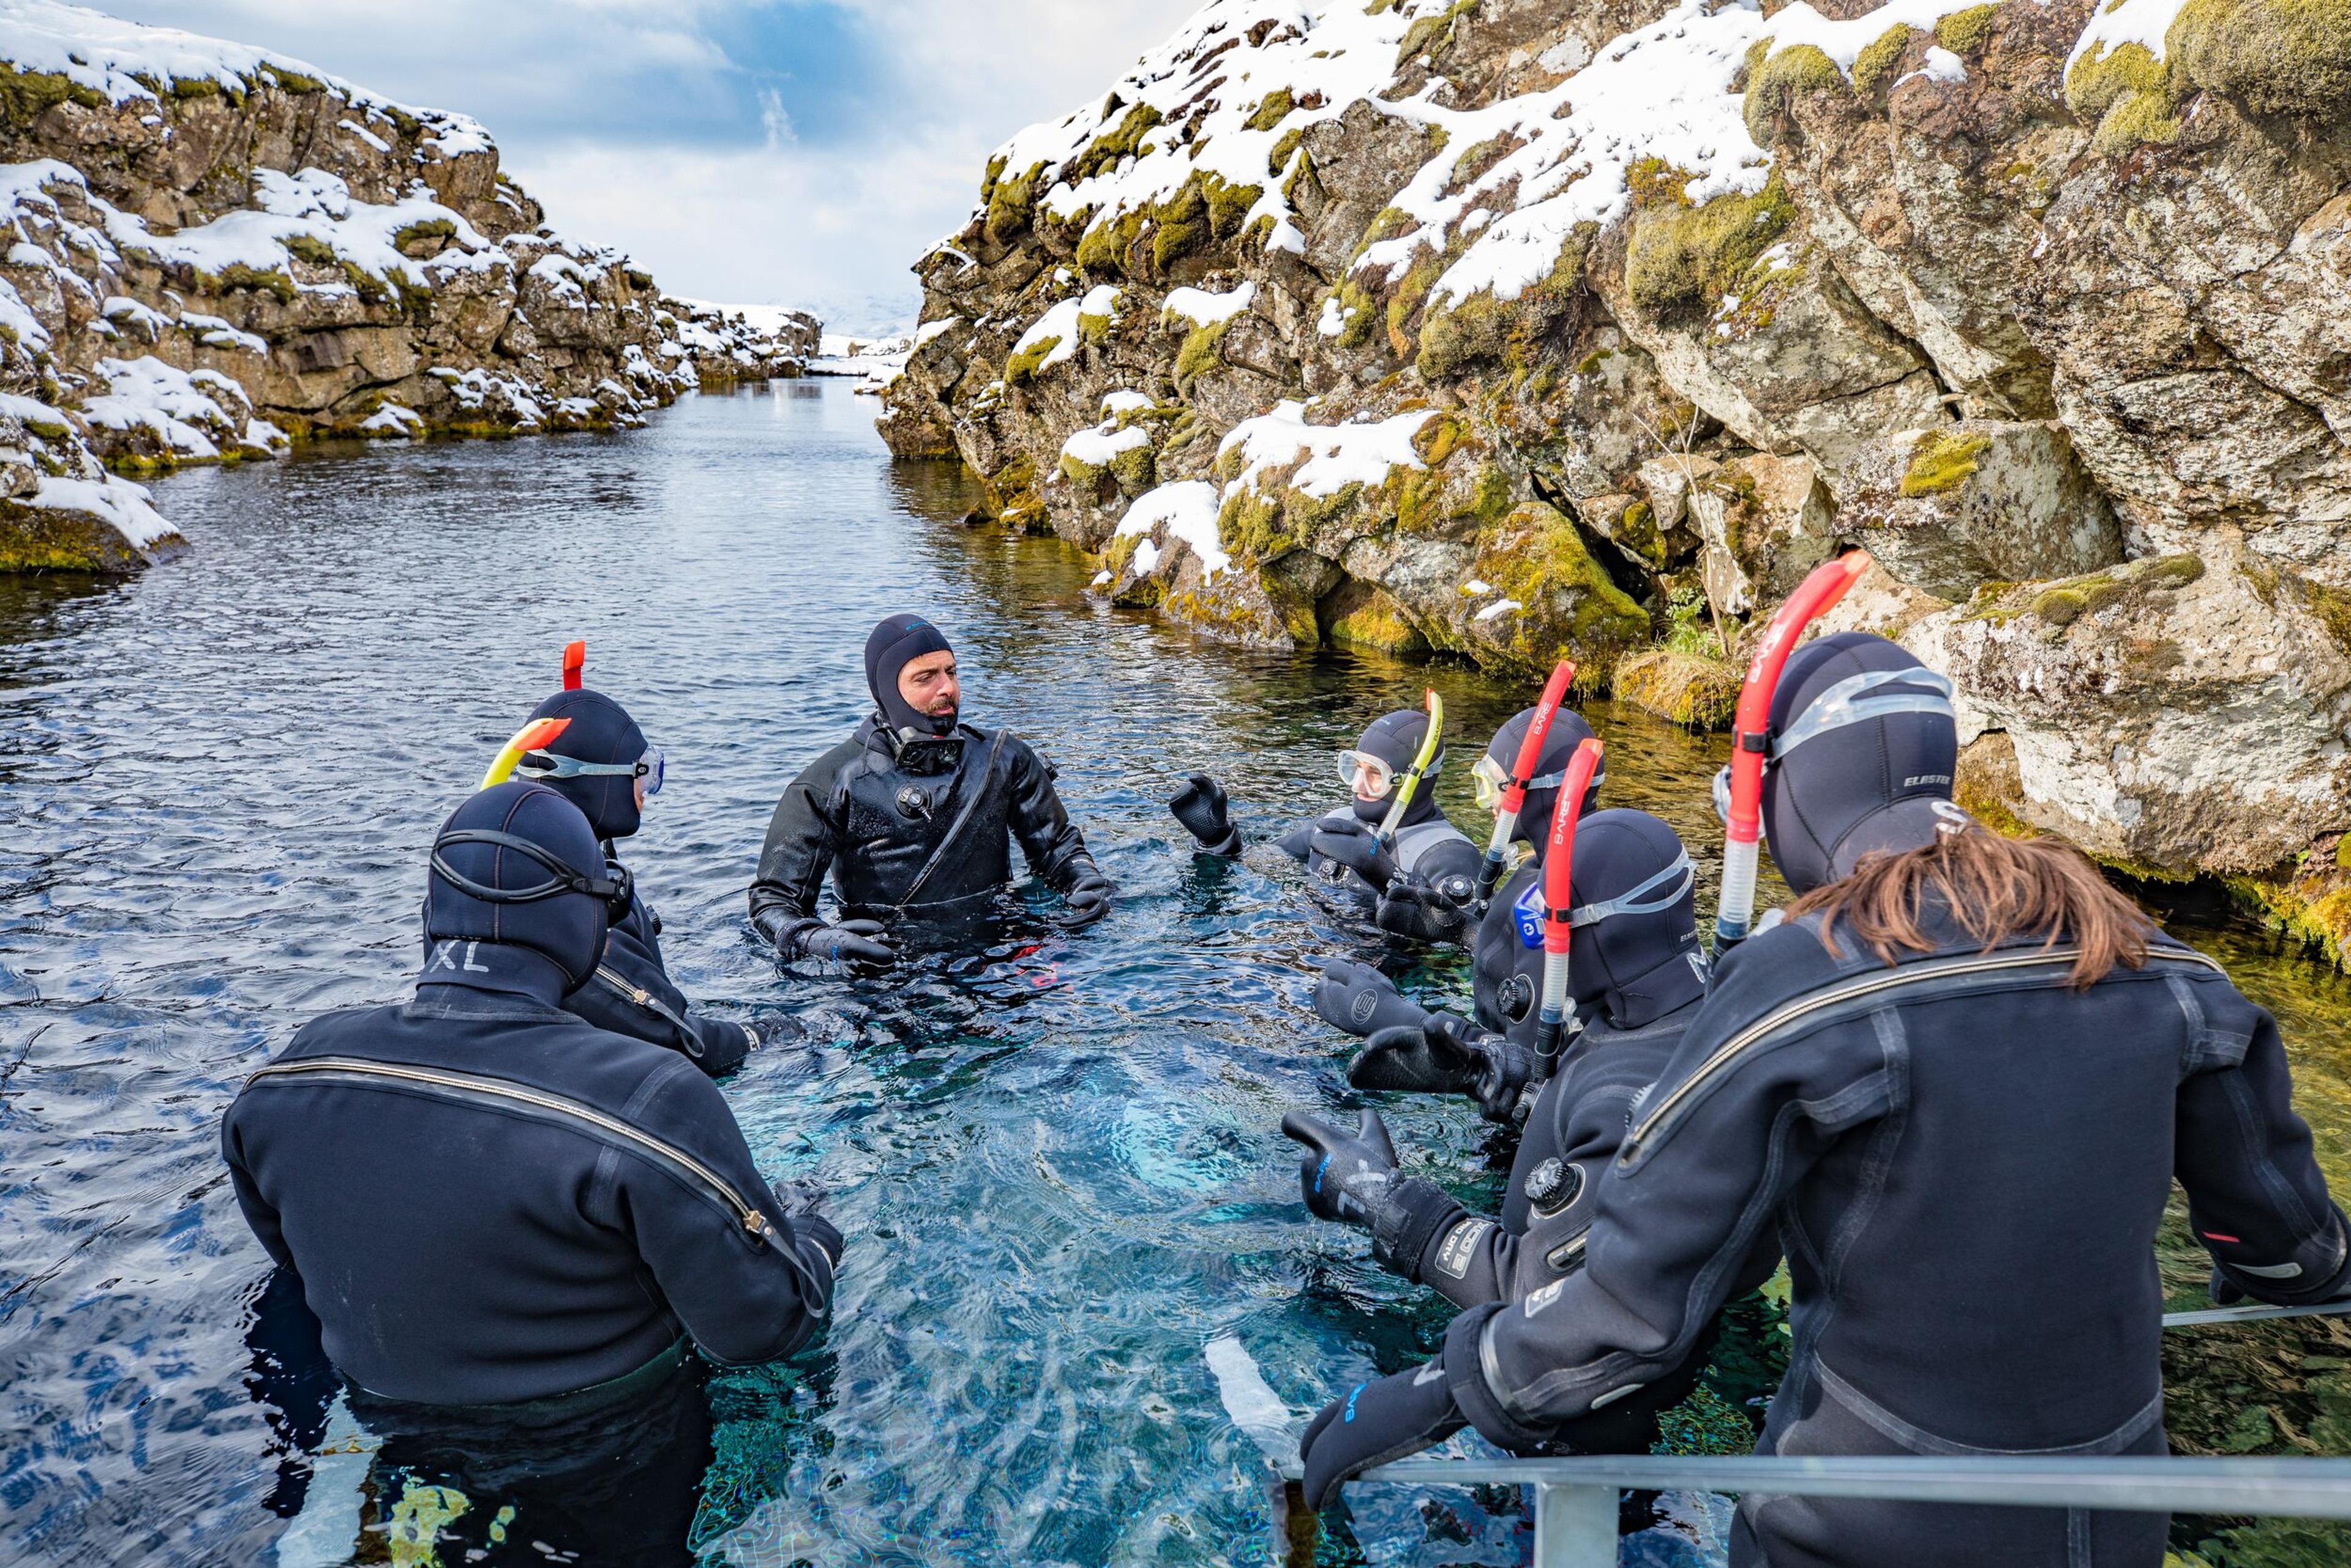 Groups of divers getting ready to snorkel in the Silfra fissure at Þingvellir National Park in Iceland.